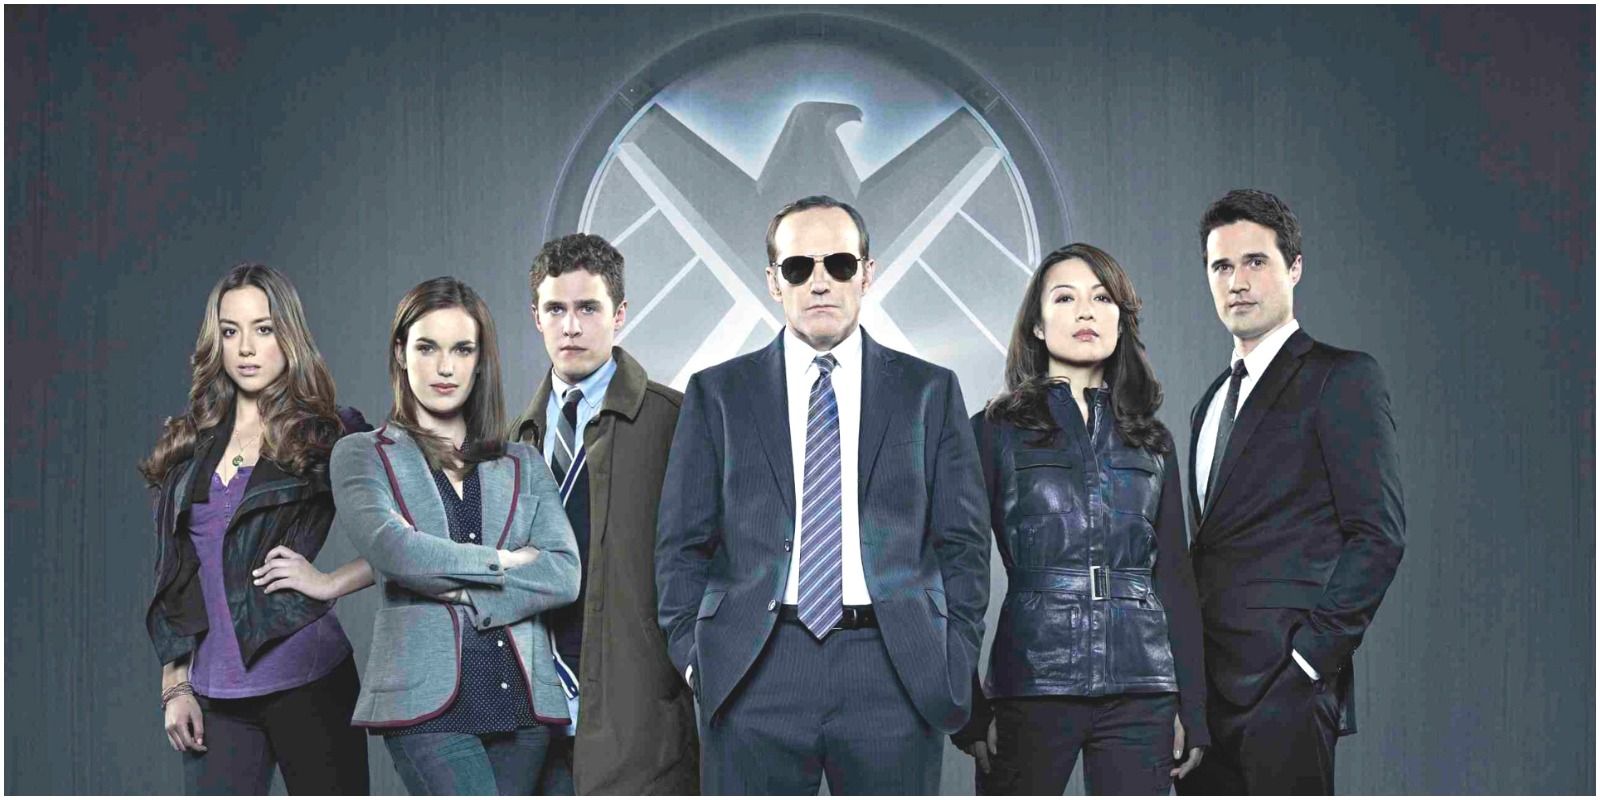 Coulson and his agents from season 1 of the show